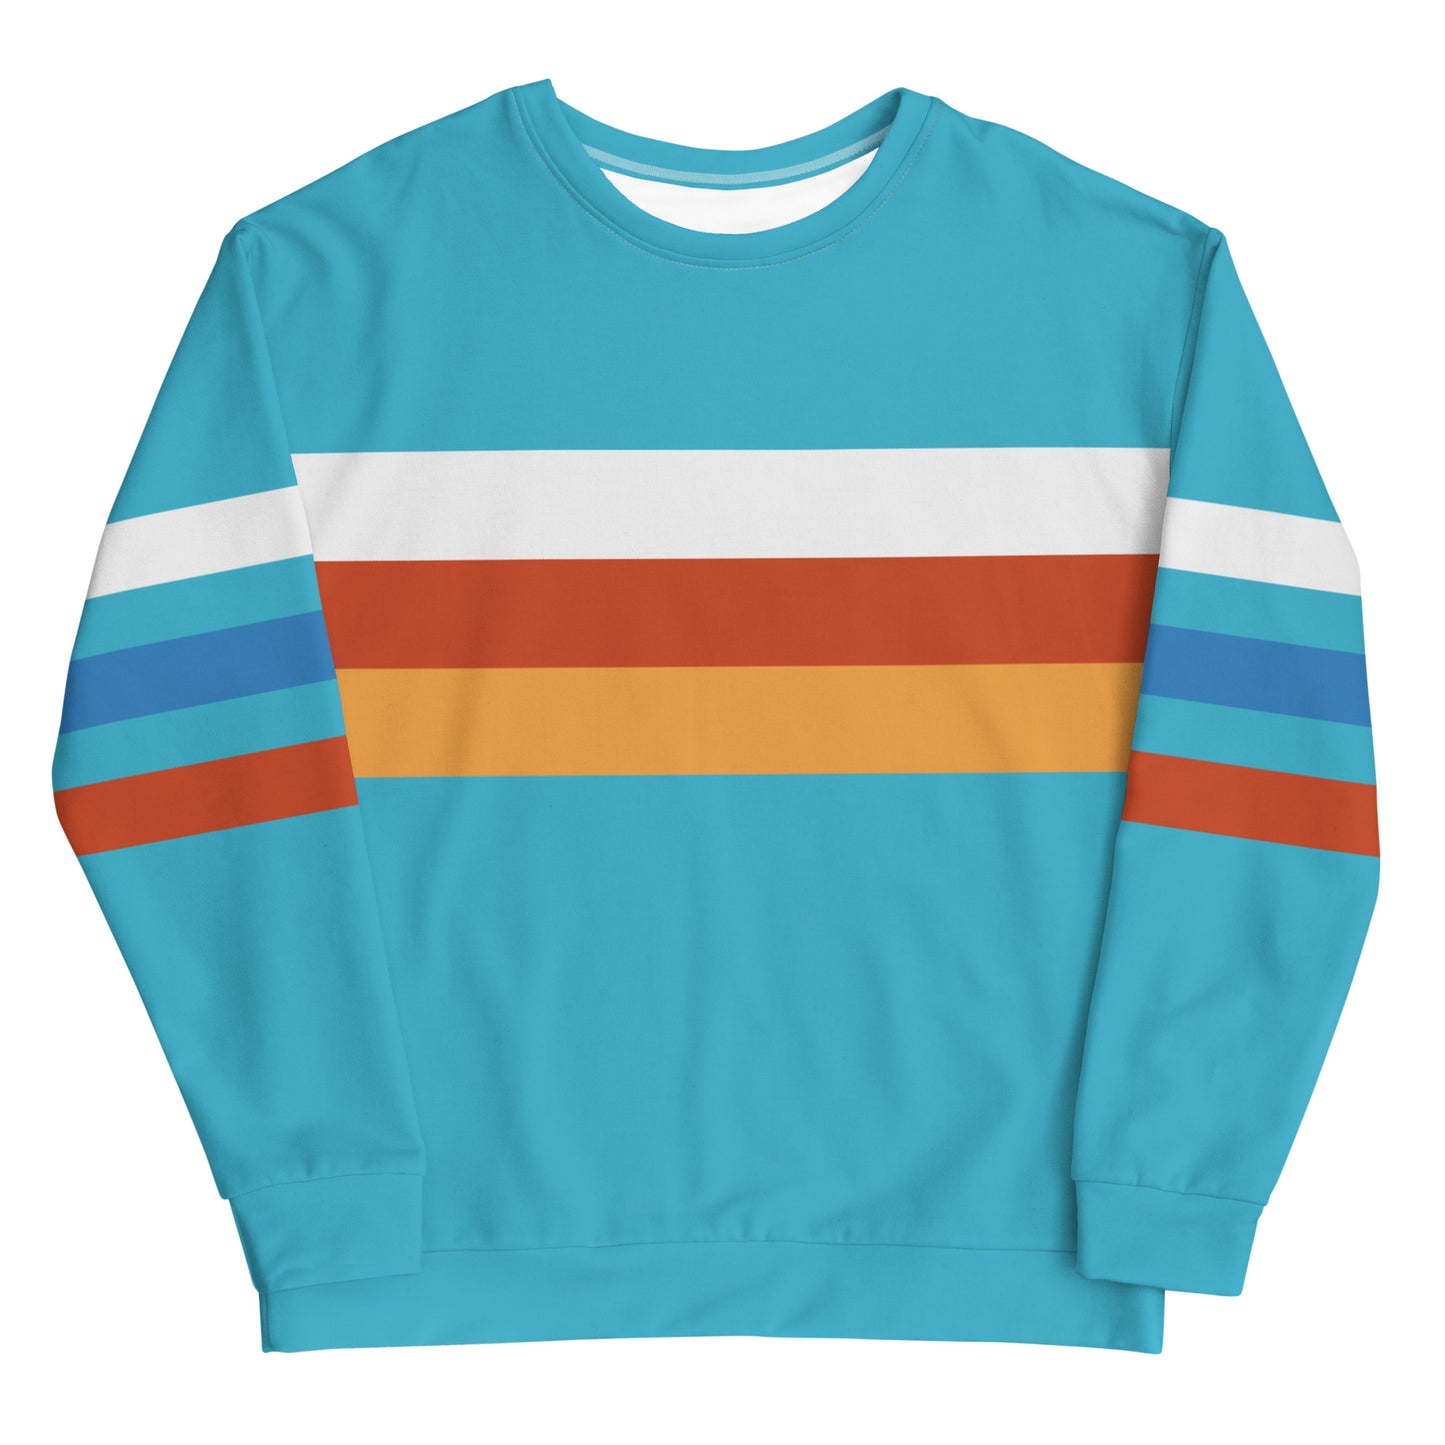 Urban 70s - Inspired By Taylor Swift - Sustainably Made Sweatshirt